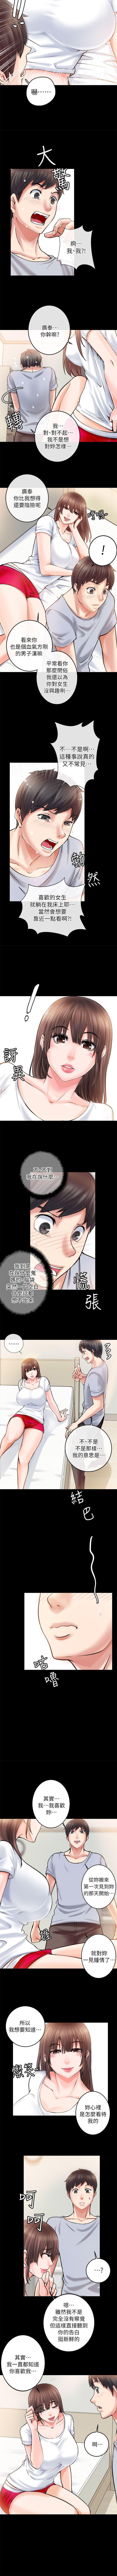 Bisexual 觸不到的她 1-39 Neighbor - Page 10